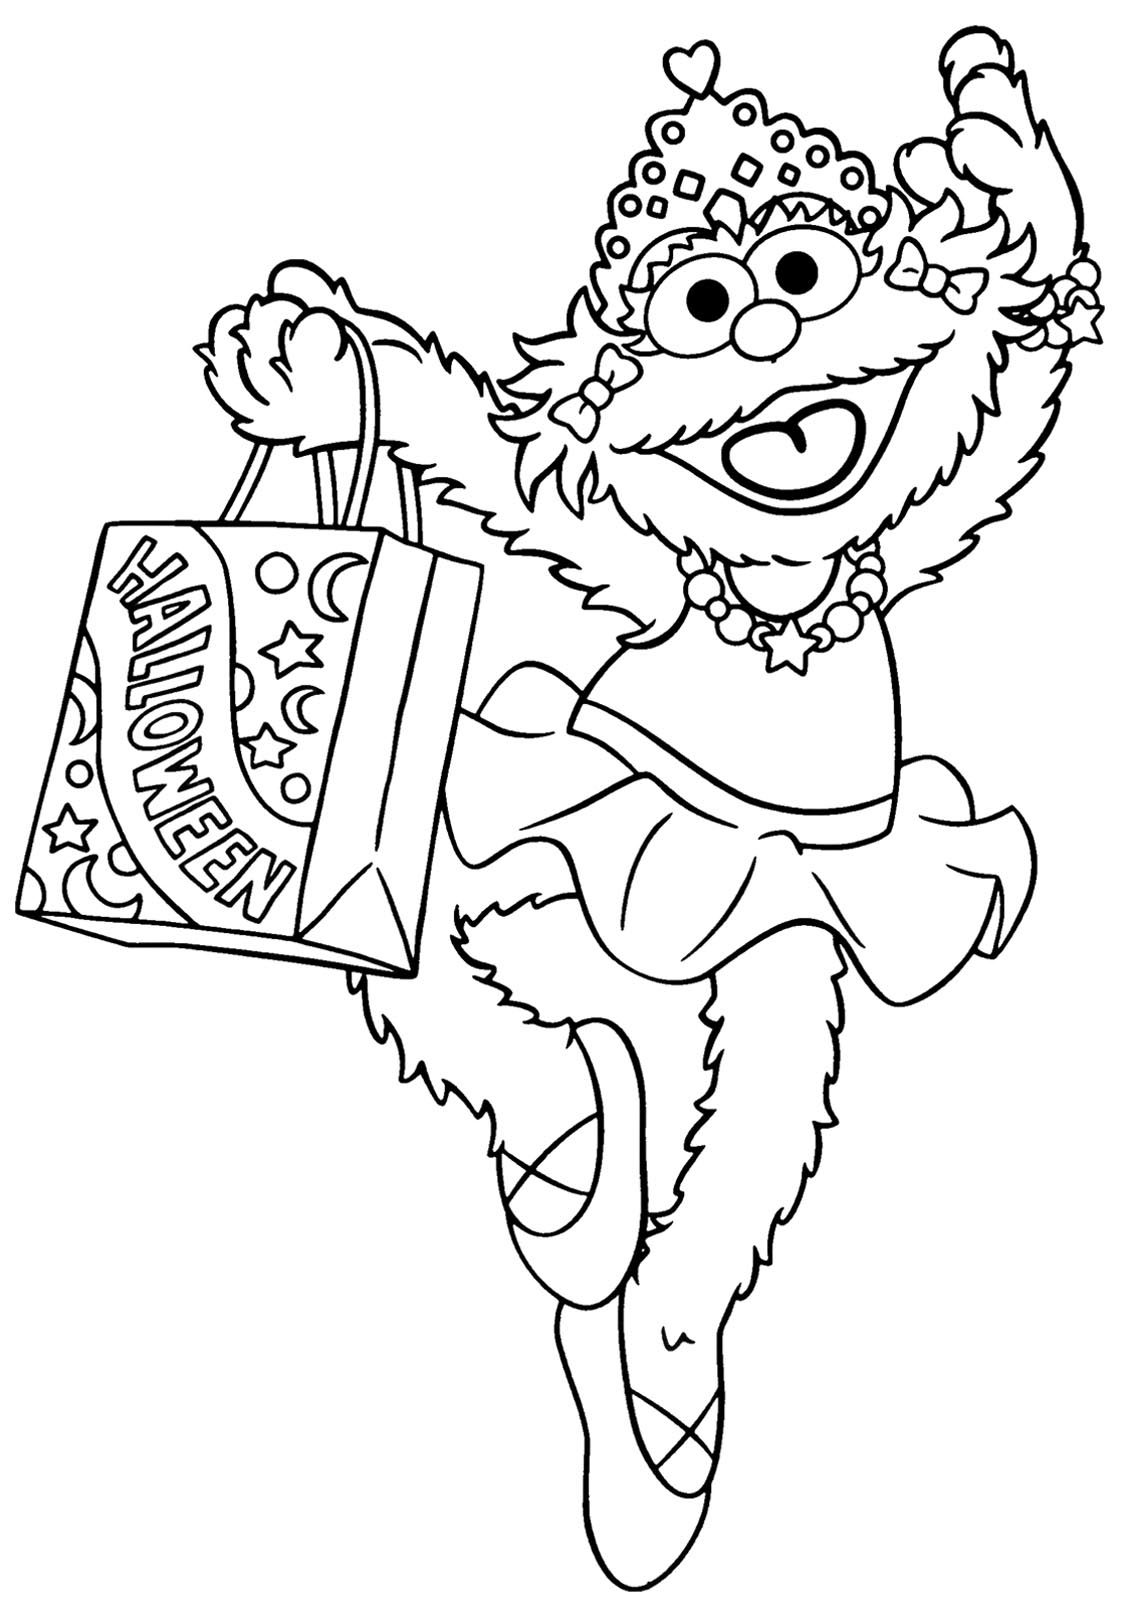 Sesame Street To Print For Free - Sesame Street Kids Coloring Pages - Free Printable Sesame Street Coloring Pages